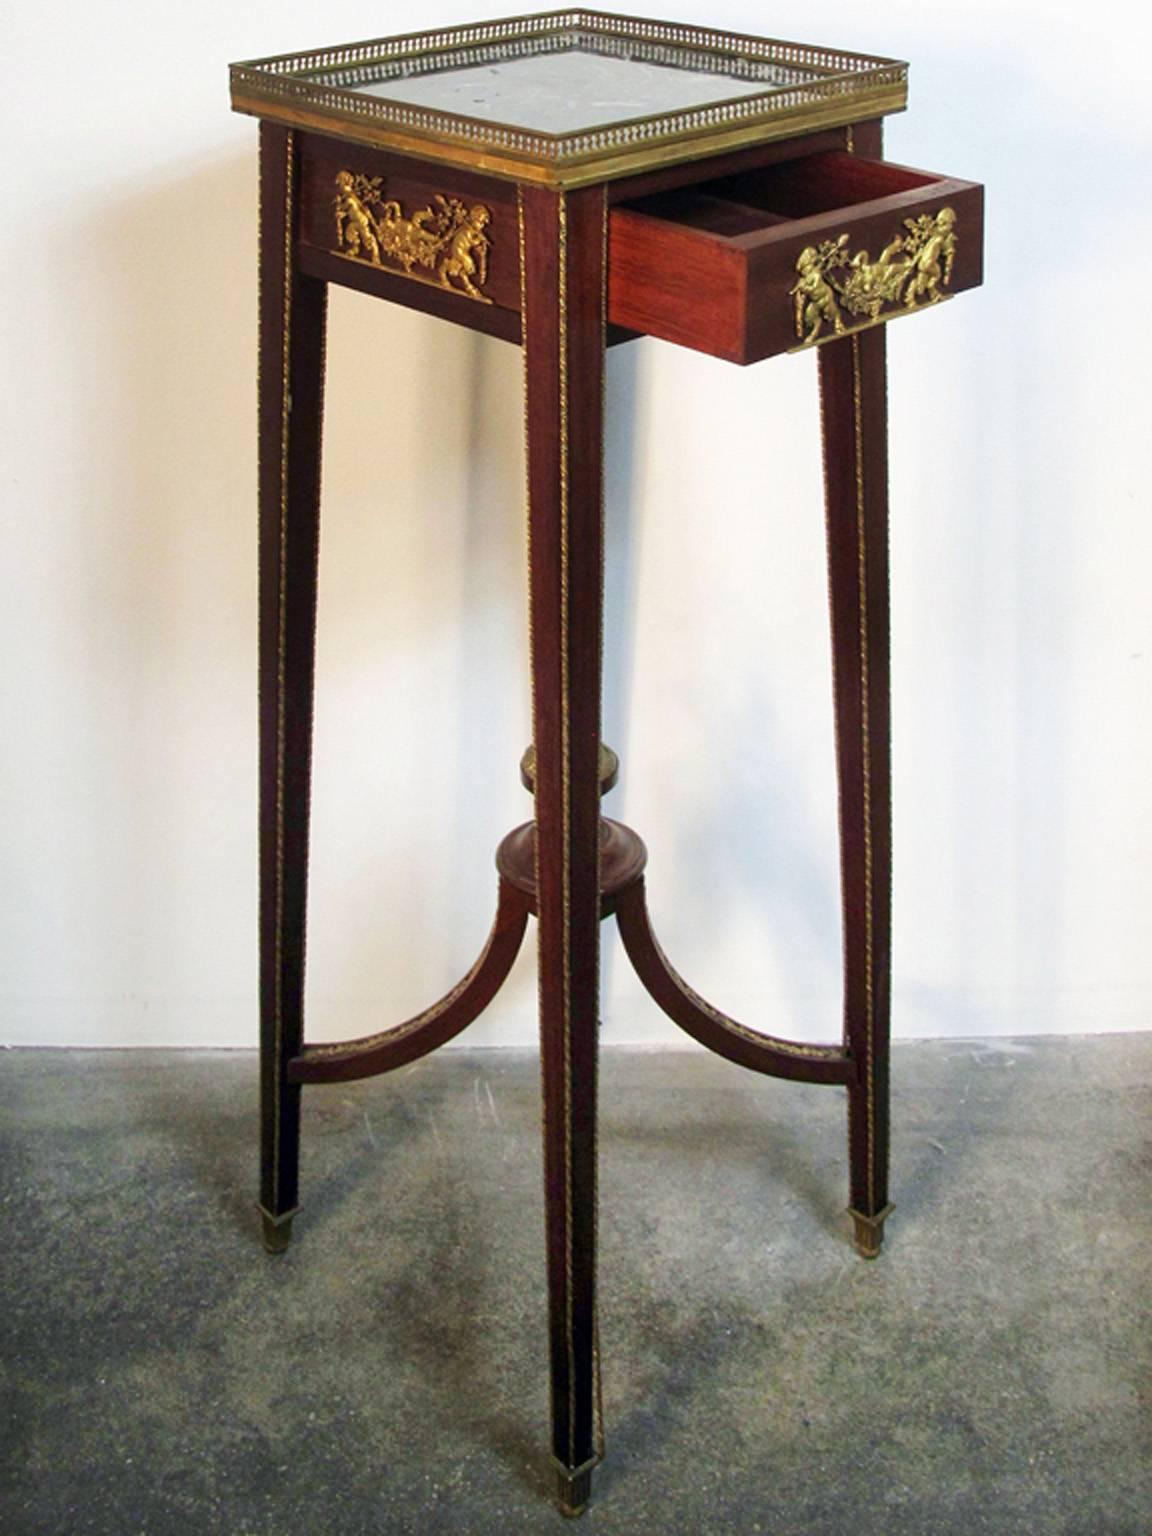 A rare antique bronze-mounted pedestal or museum Stand attributed to Francois Linke. Having the finest detail and quality typical of important objects of art at the Paris Exposition Universelle 1889 and 1900. 

A secret button underneath pops open